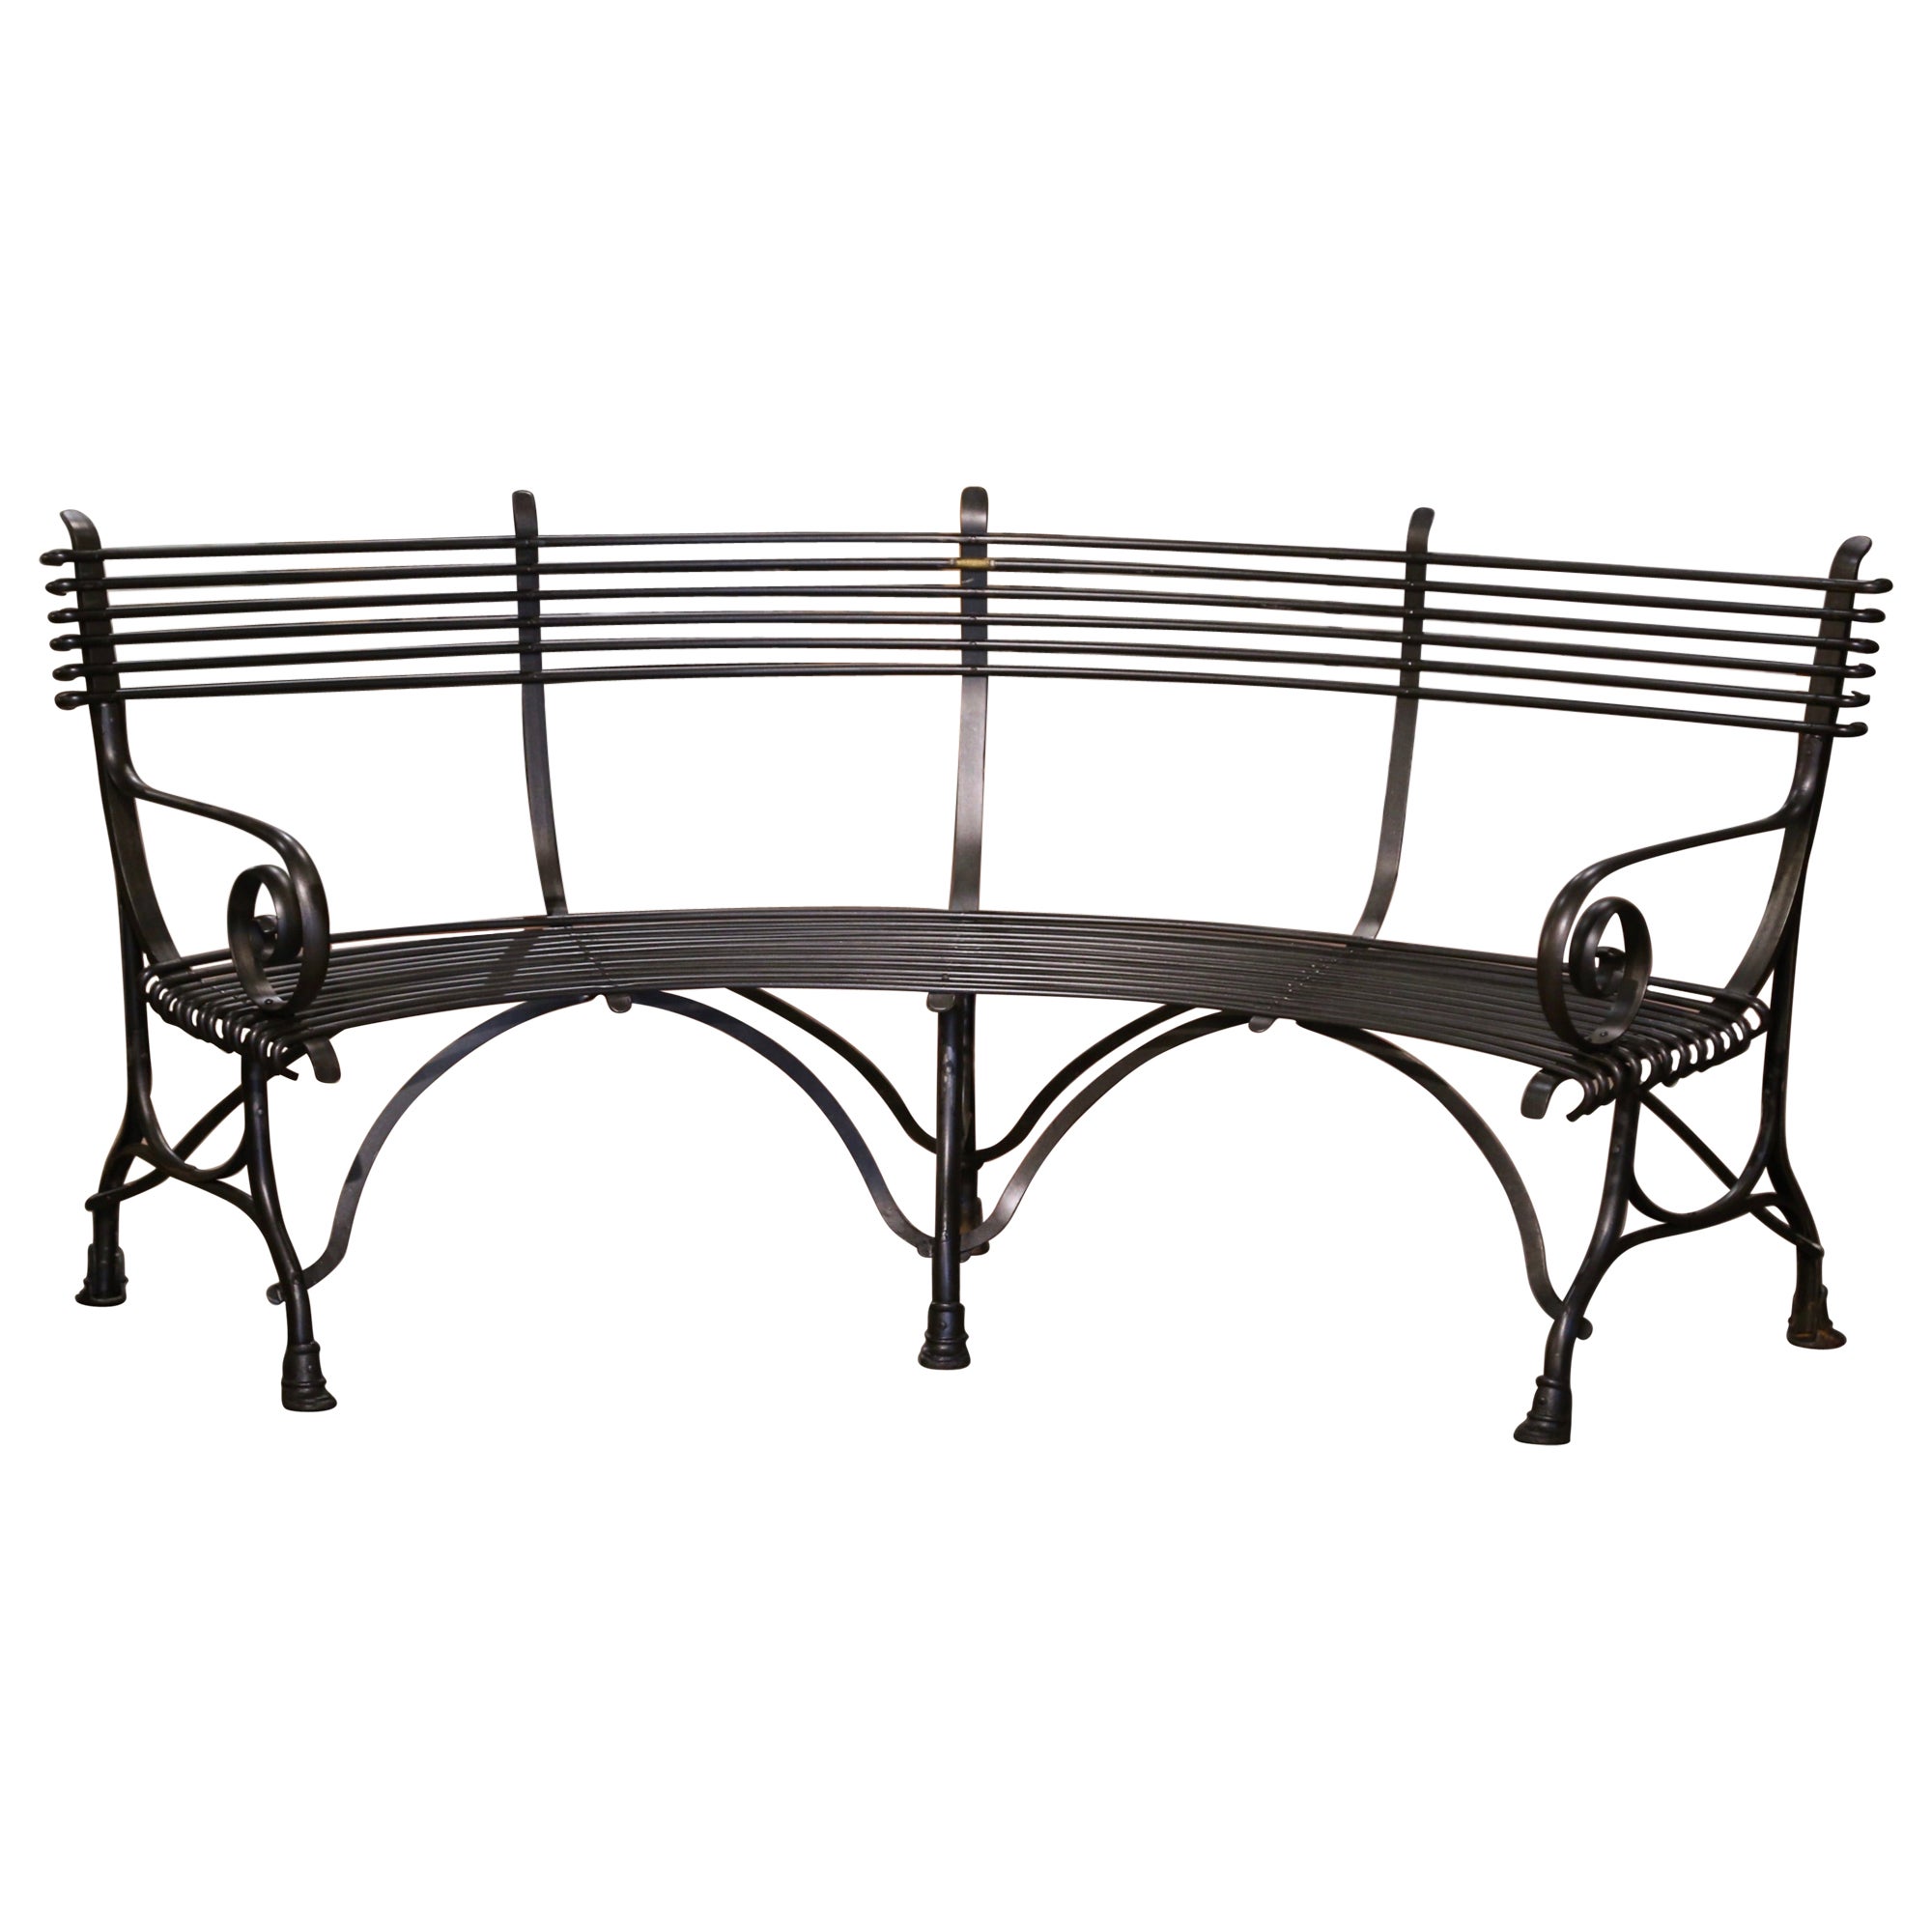 French Curved Iron Four-Seat Bench Signed "Sauveur Arras"